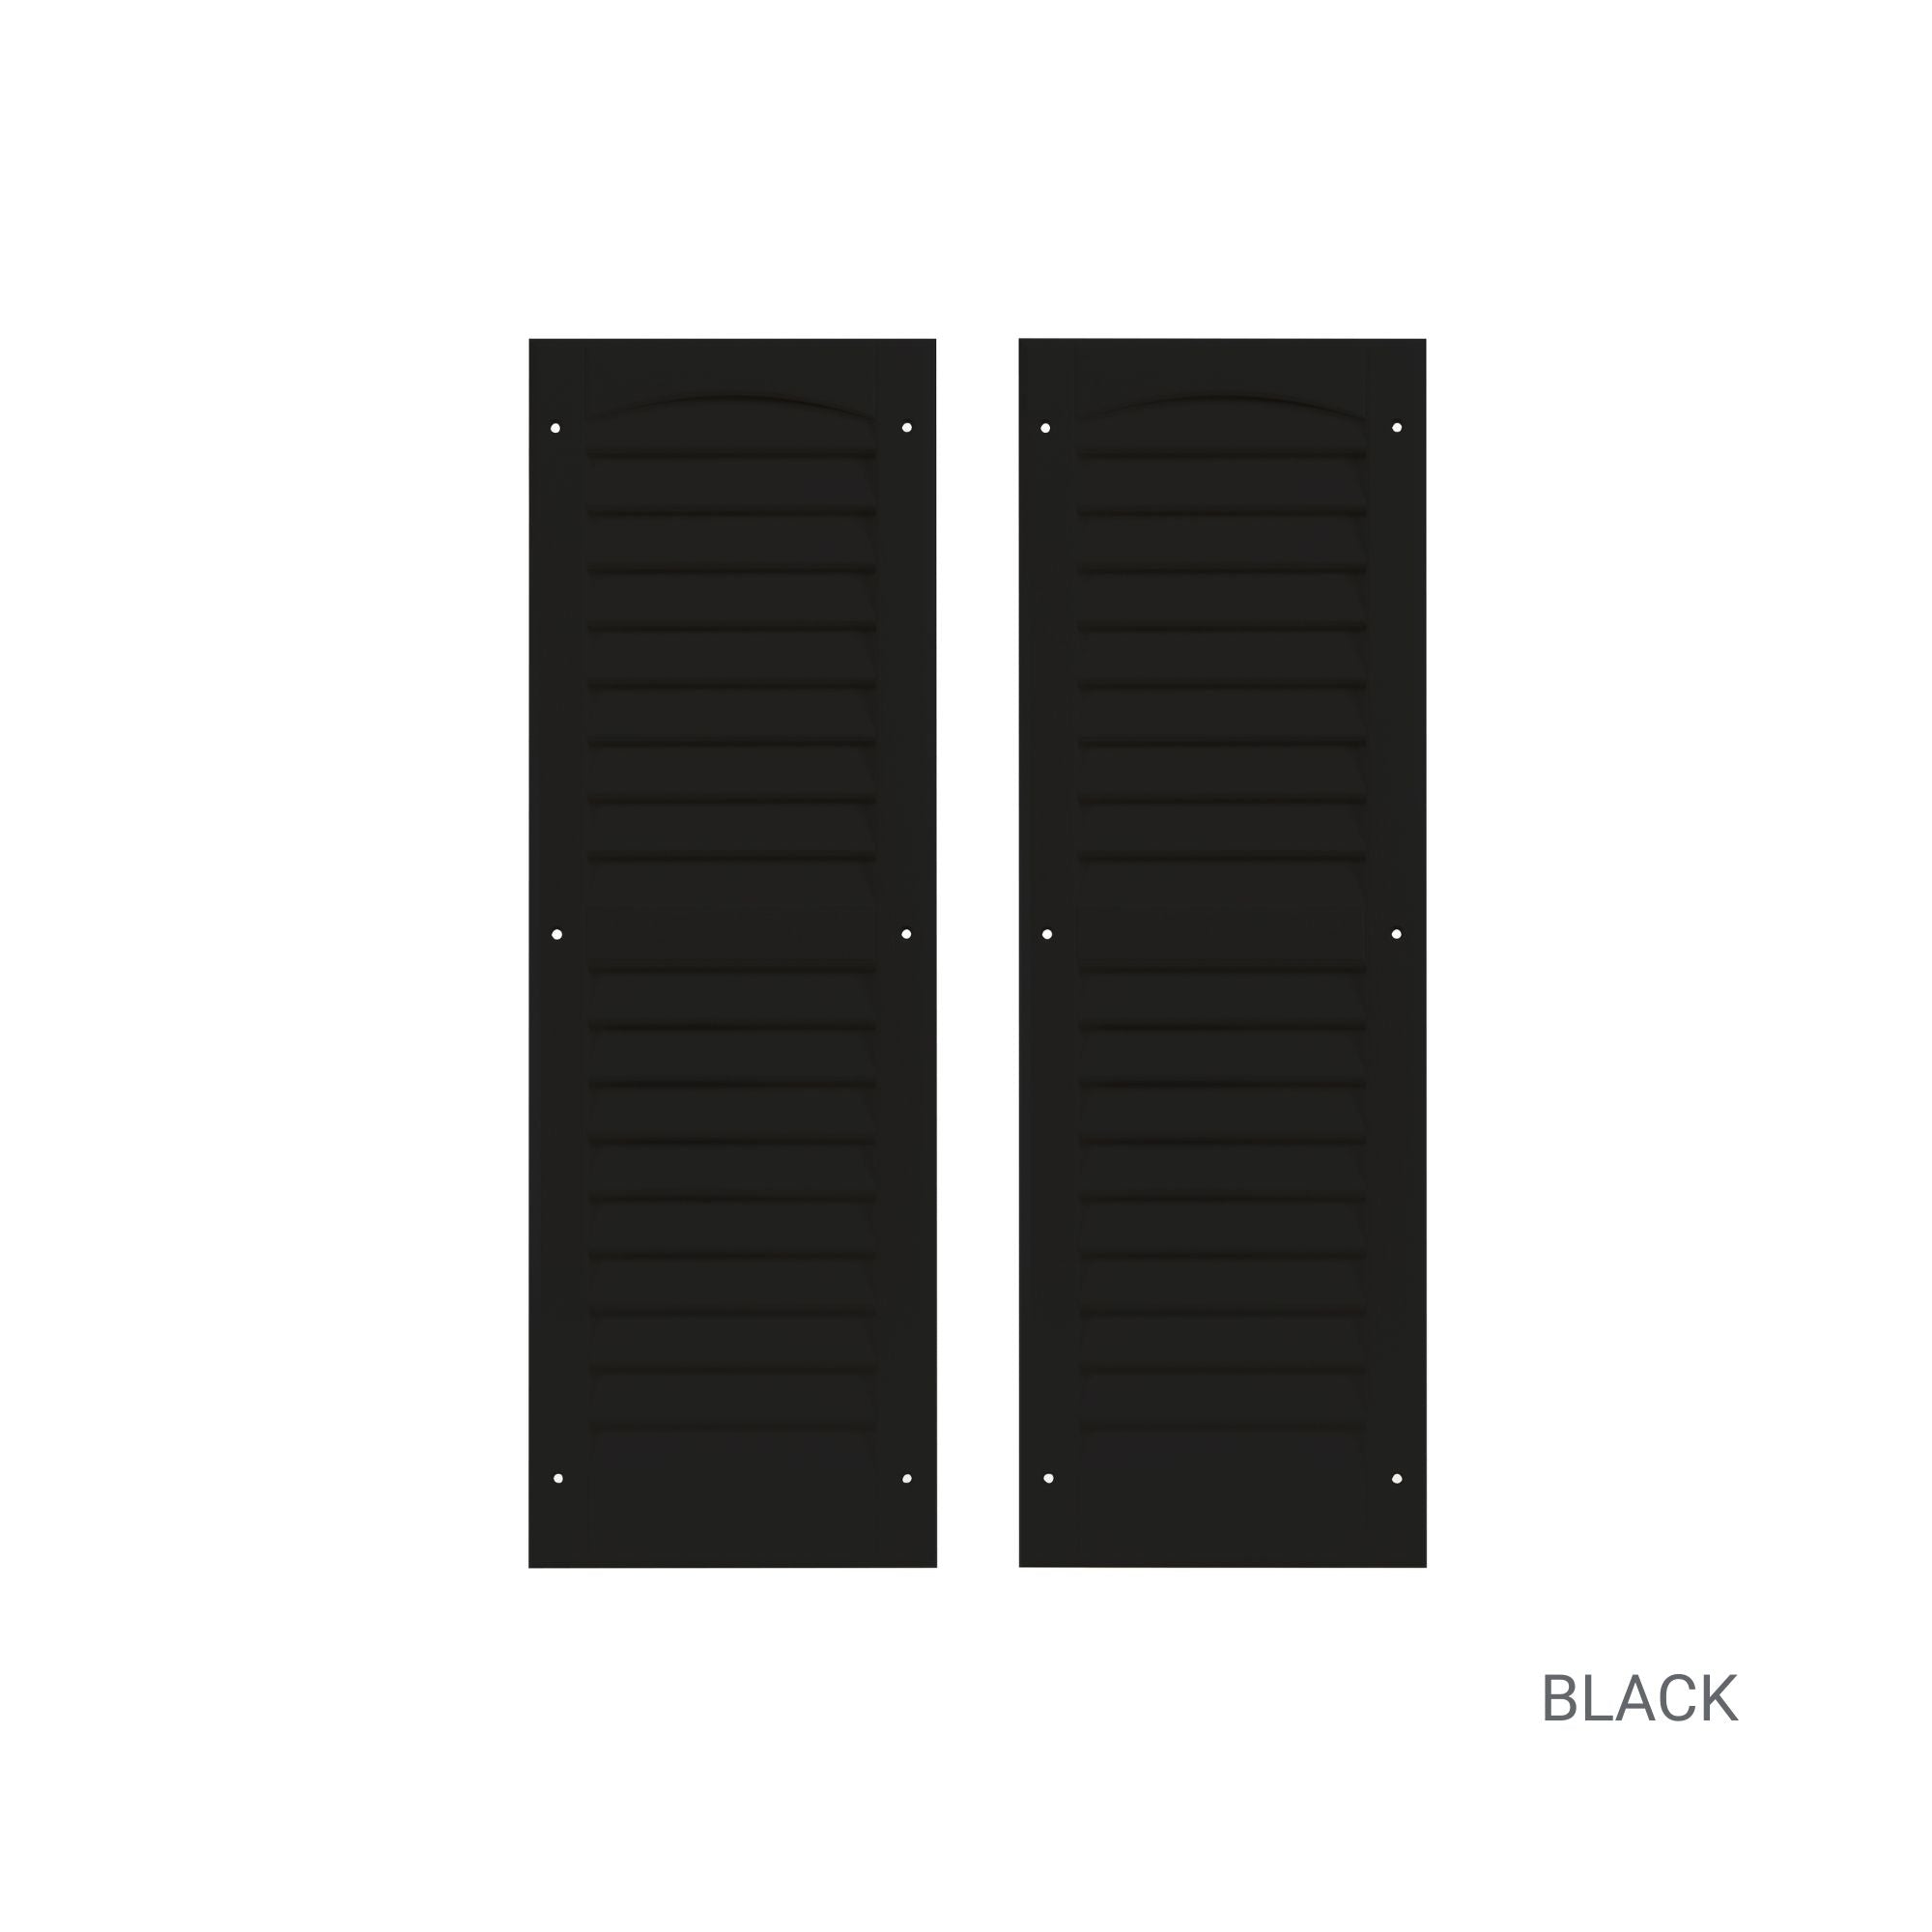 Pair of 9" W x 27" H Louvered Black Shutters for Sheds, Playhouses, and MORE